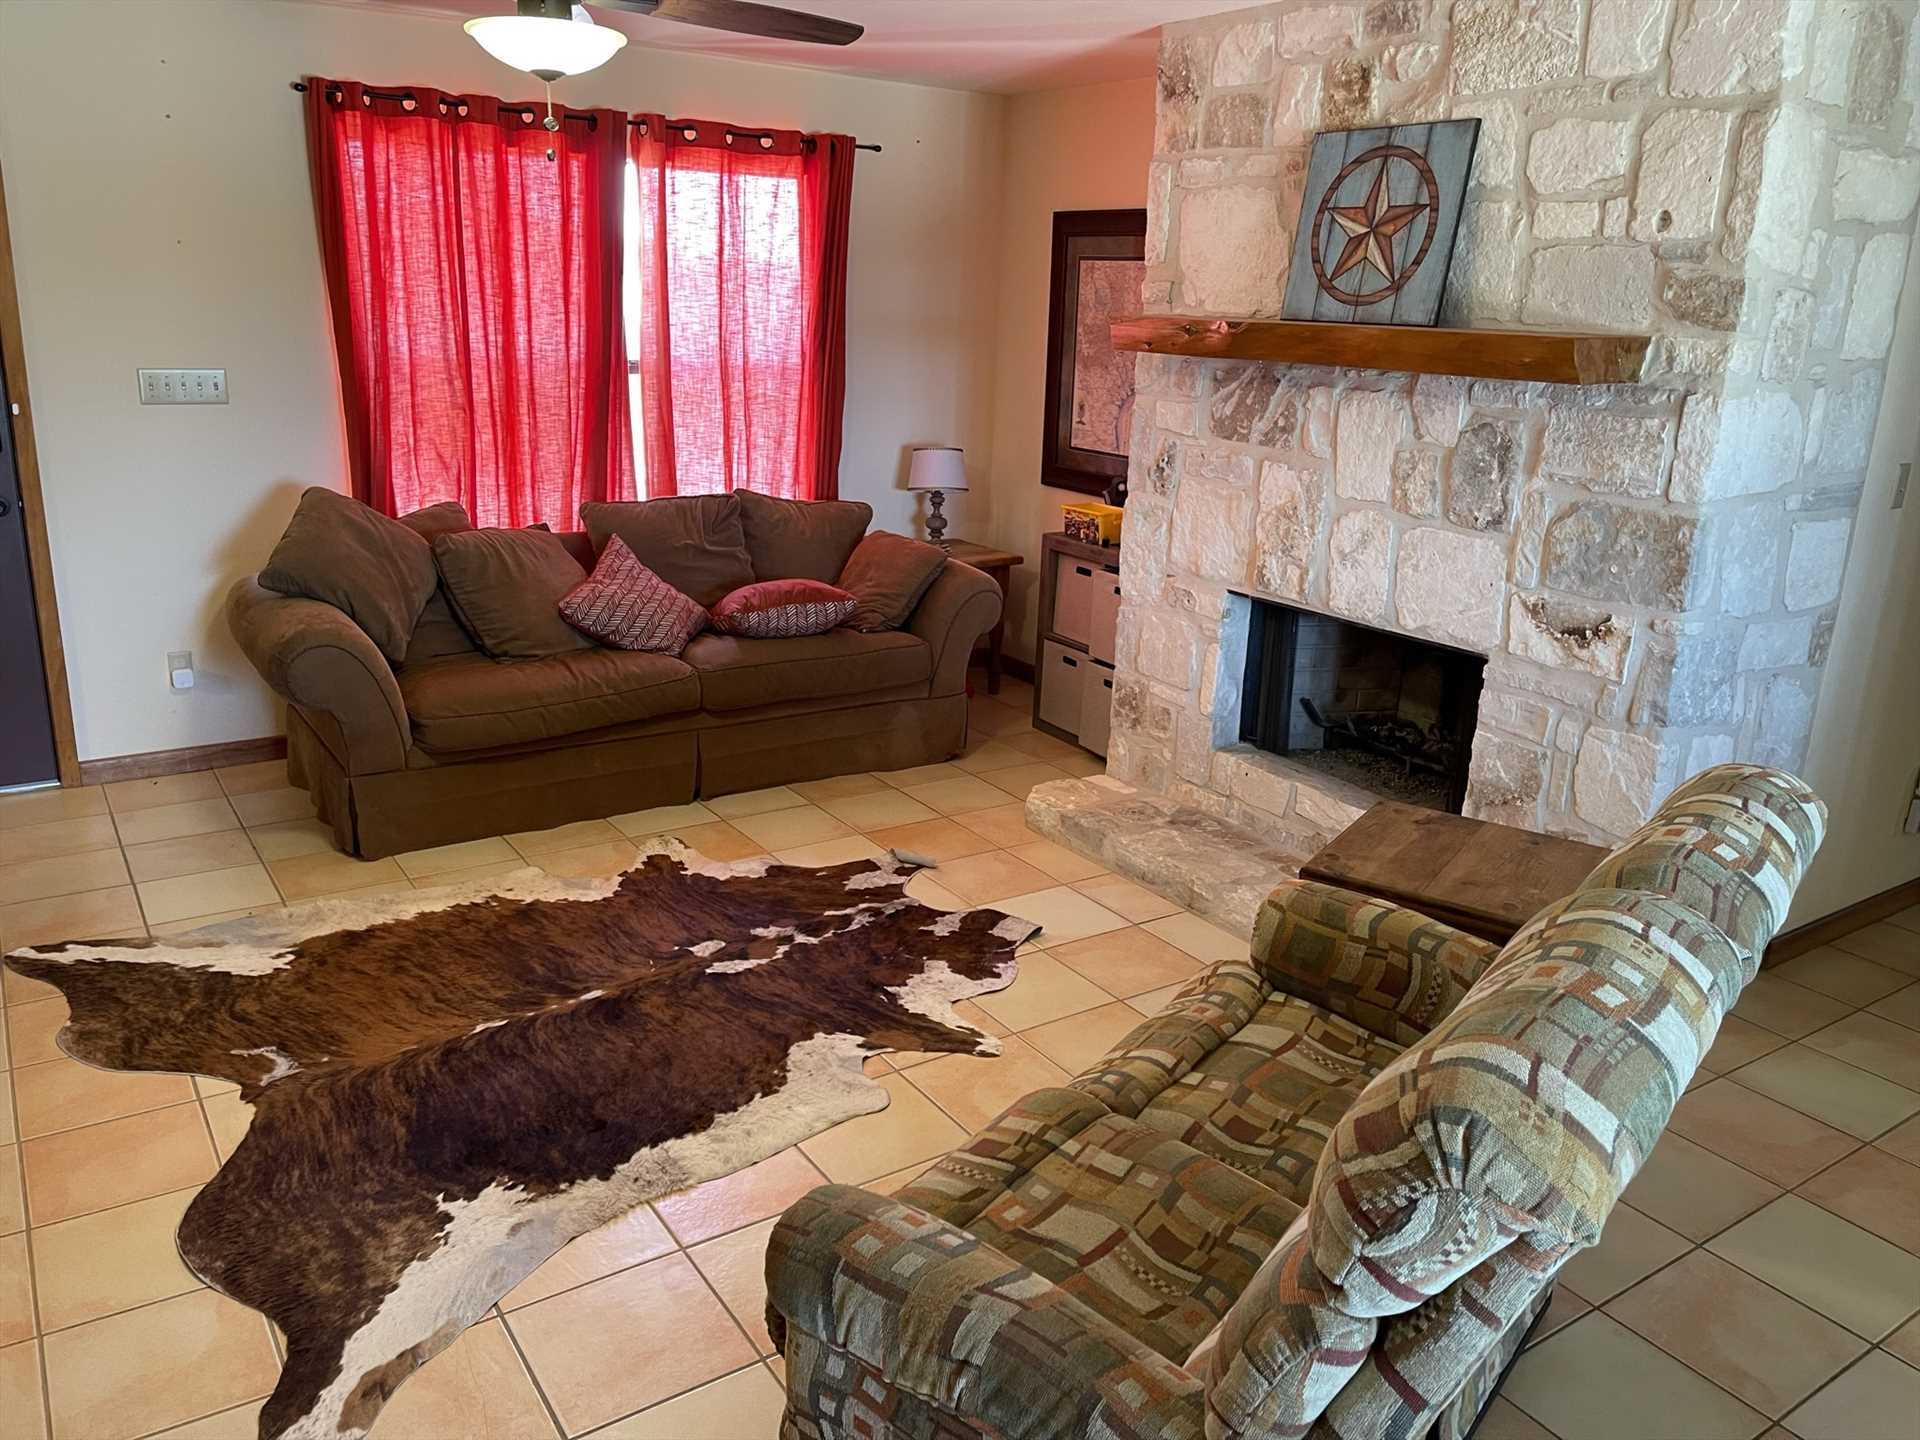                                                 Comfort is key at the Texas Longhorn Cabin! From plush furniture to a stone fireplace to central air and heat, you'll feel right at home.